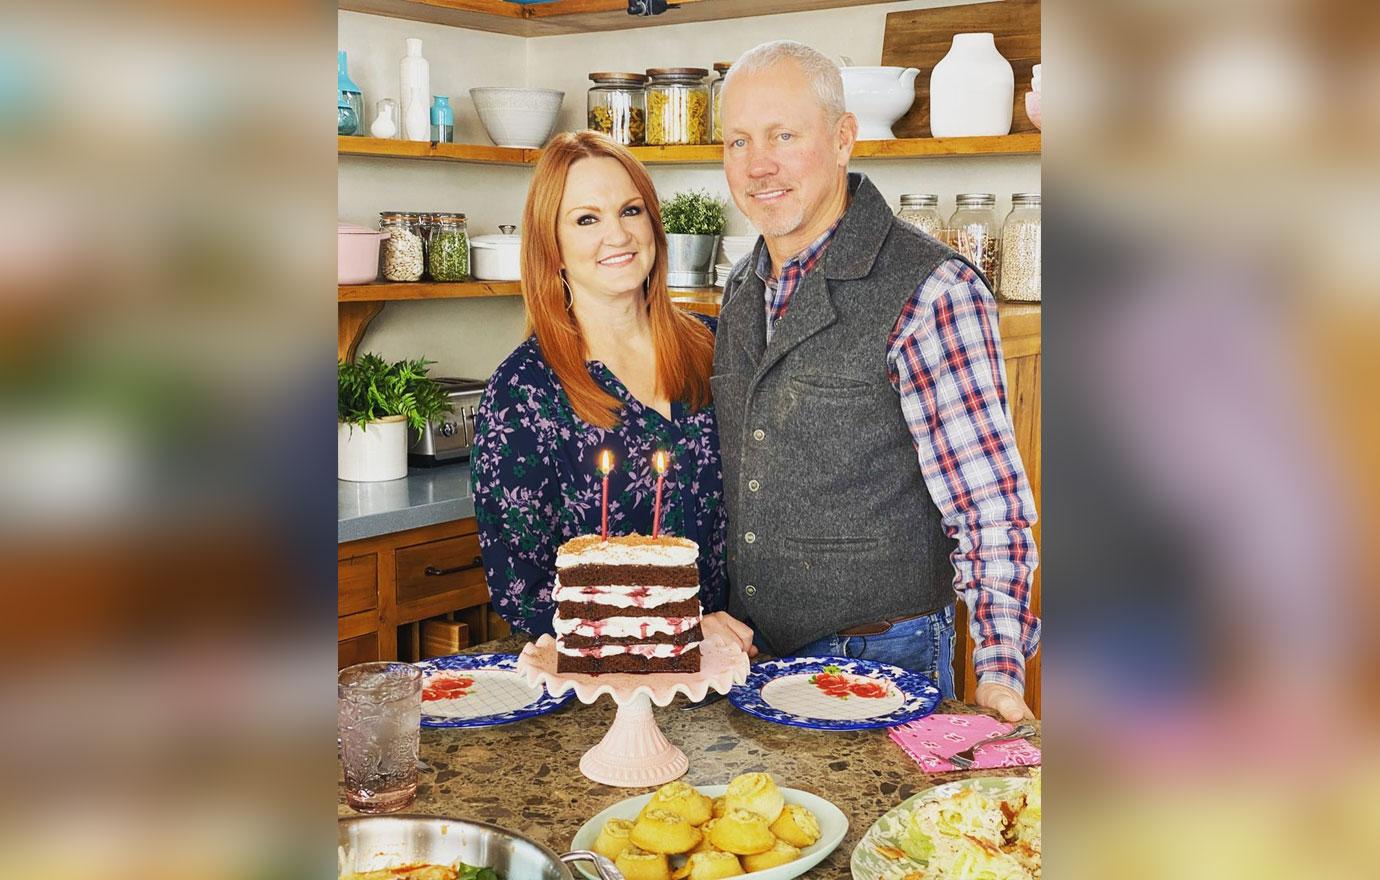 Pioneer Woman Ree Drummond marks 25th anniversary with husband Ladd: 'It's  been a wild adventure